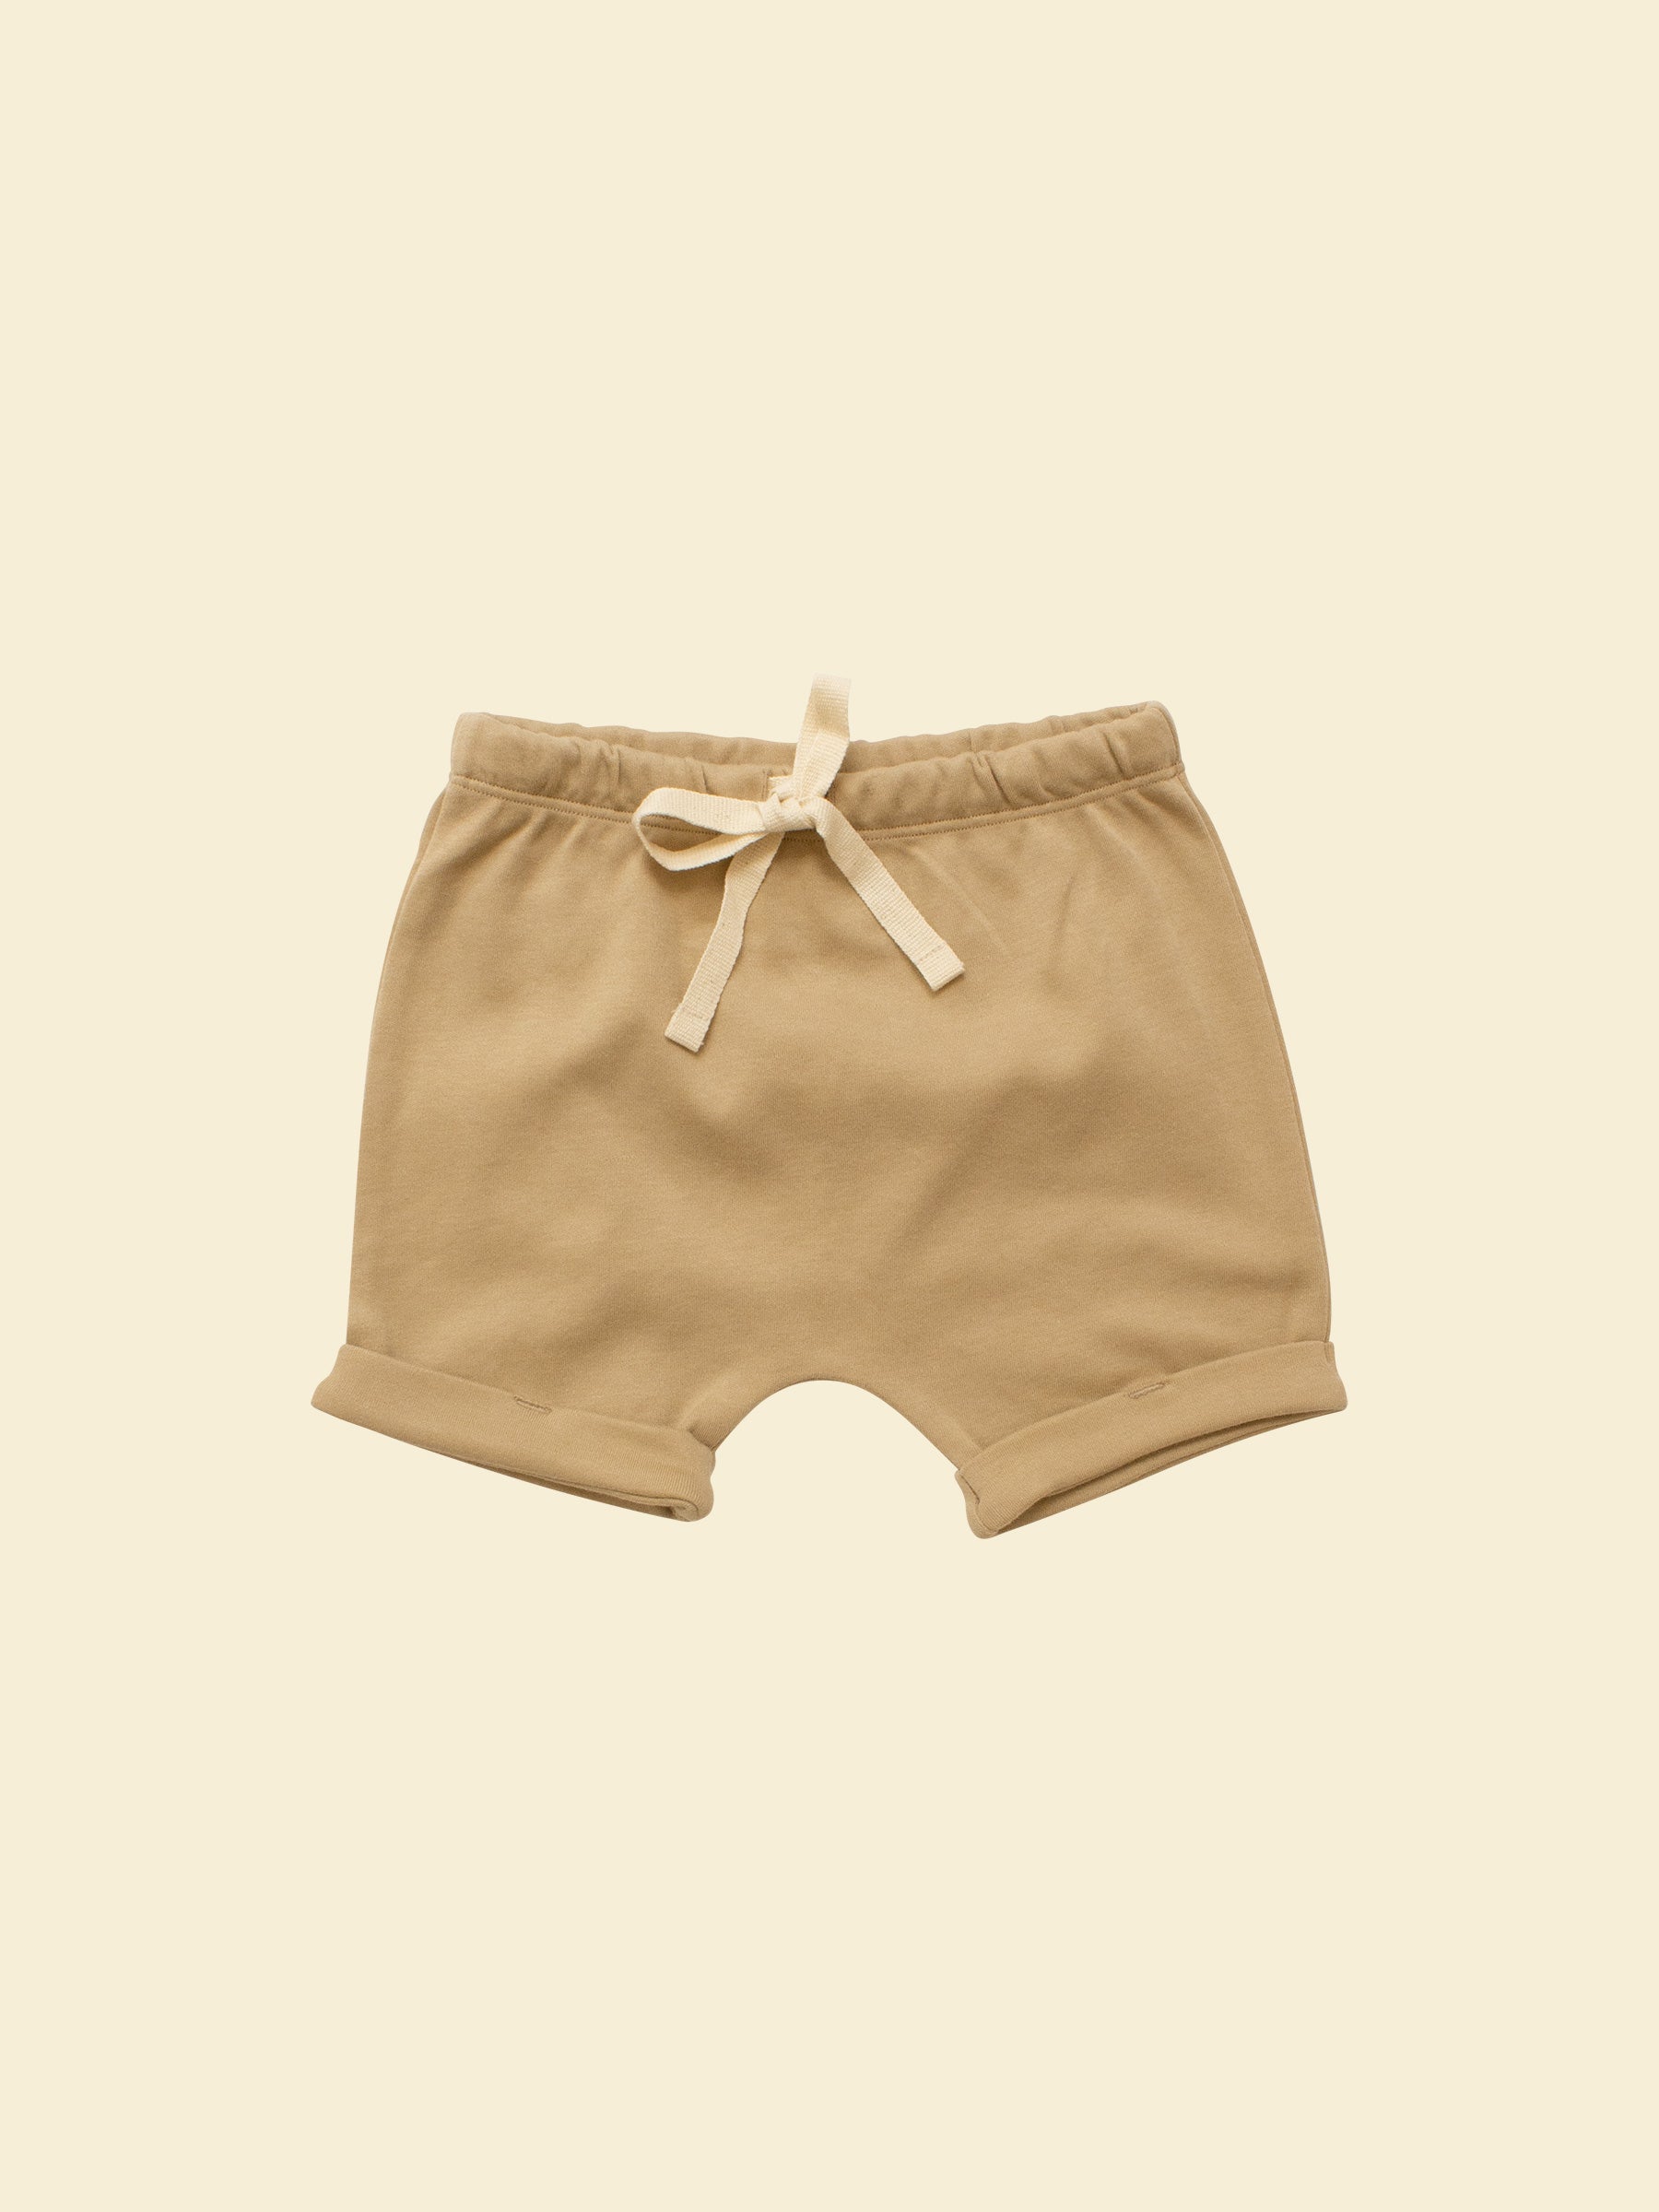 Summer Shorts - Sand (front)